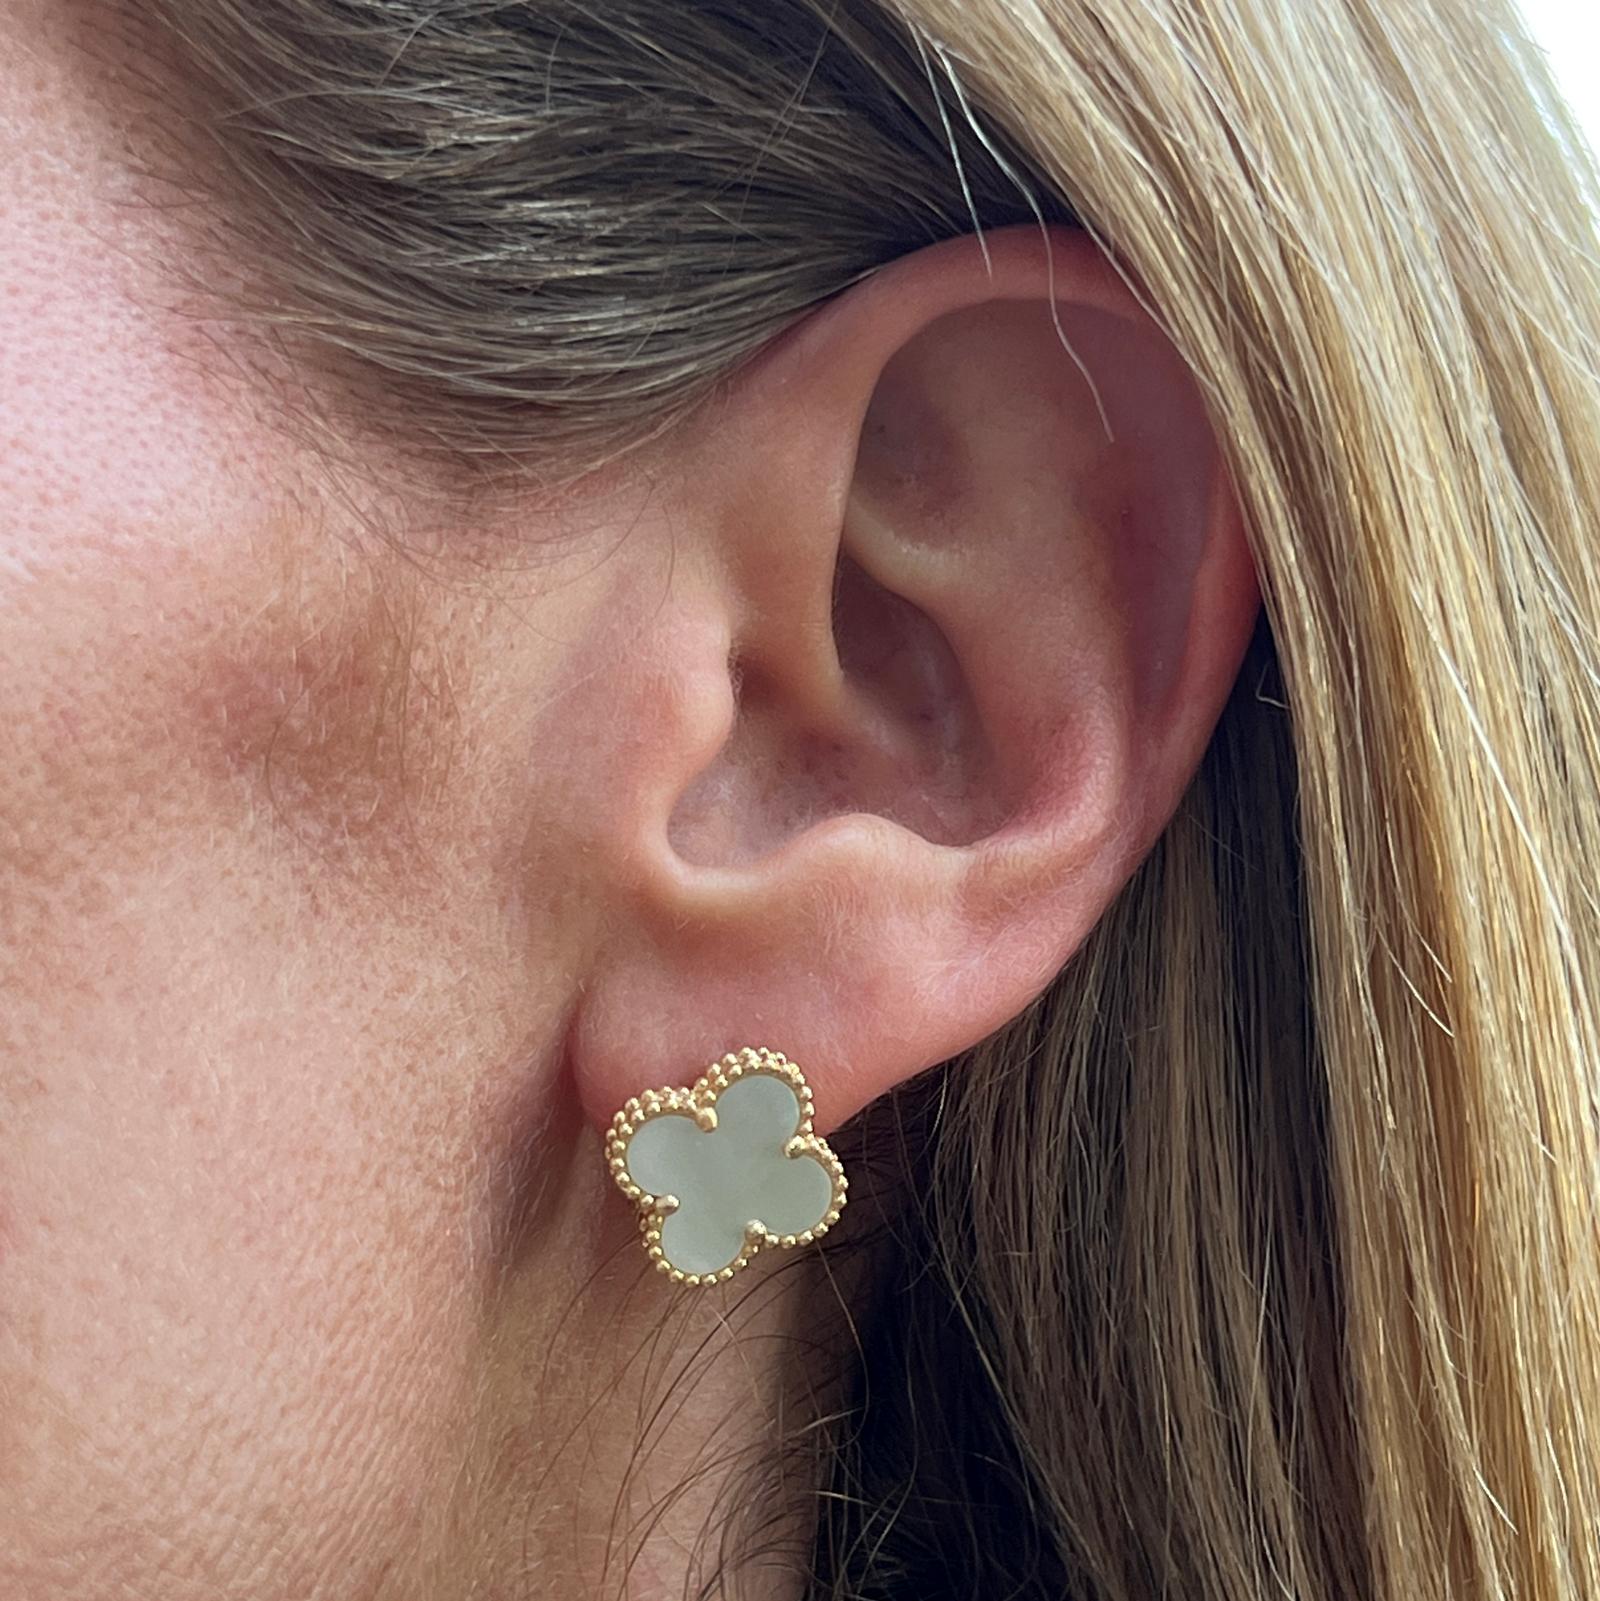 Authentic Van Cleef & Arpels Vintage Alhambra Mother of Pearl earrings crafted in 18 karat yellow gold. These are circa 2019. The earrings measures 15 x 15mm, they are signed, hallmarked and numbered. Come in original box with original paperwork. 